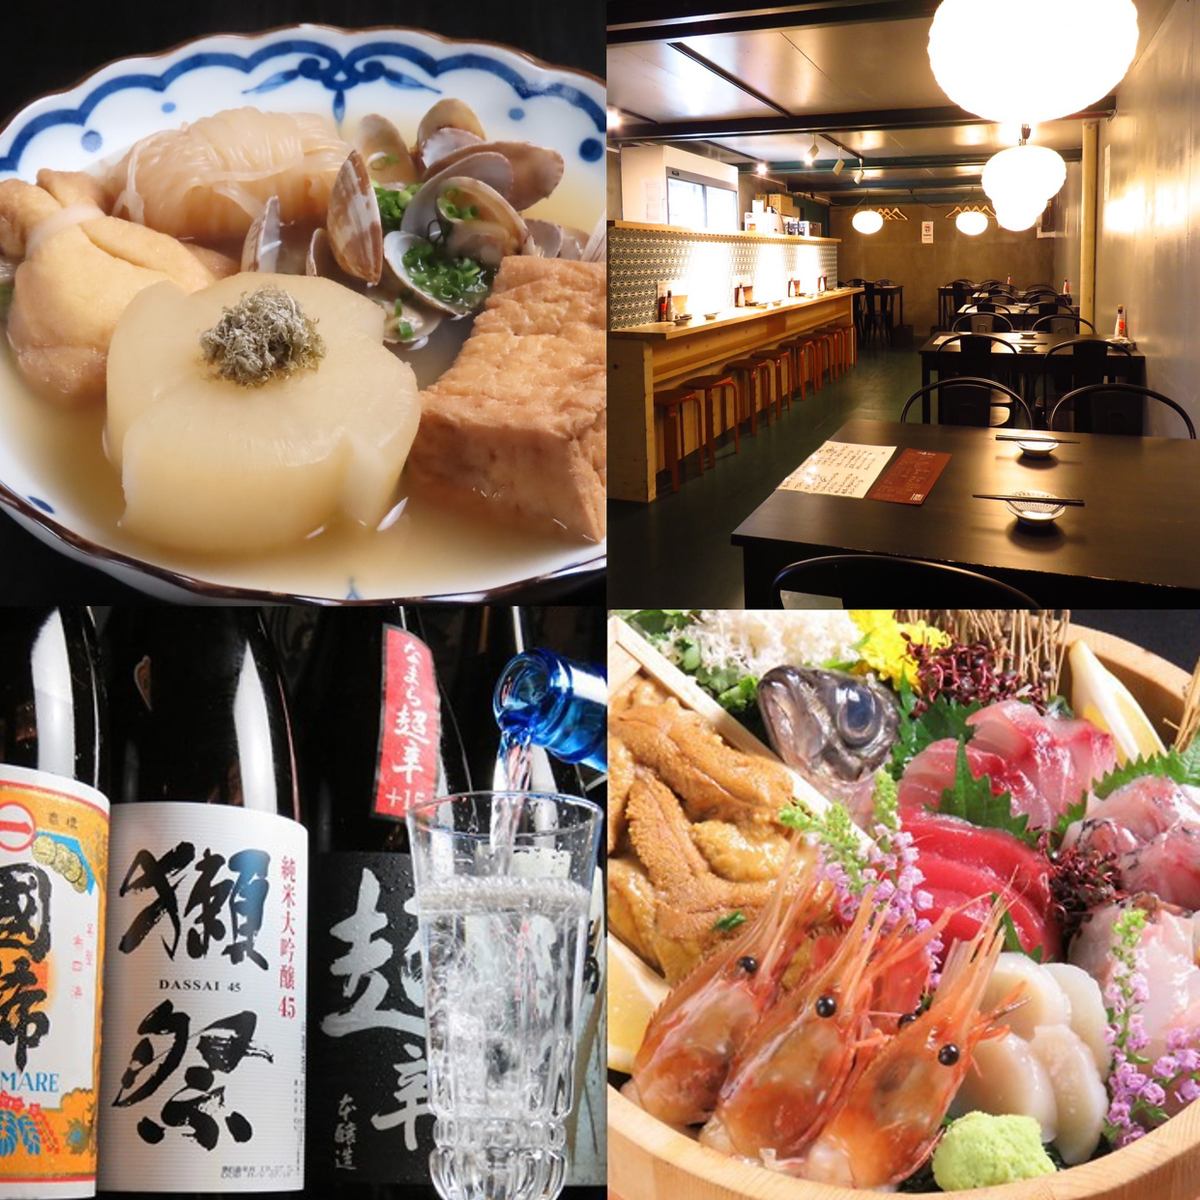 Draft beer and all-you-can-drink with local sake♪ Open until morning!